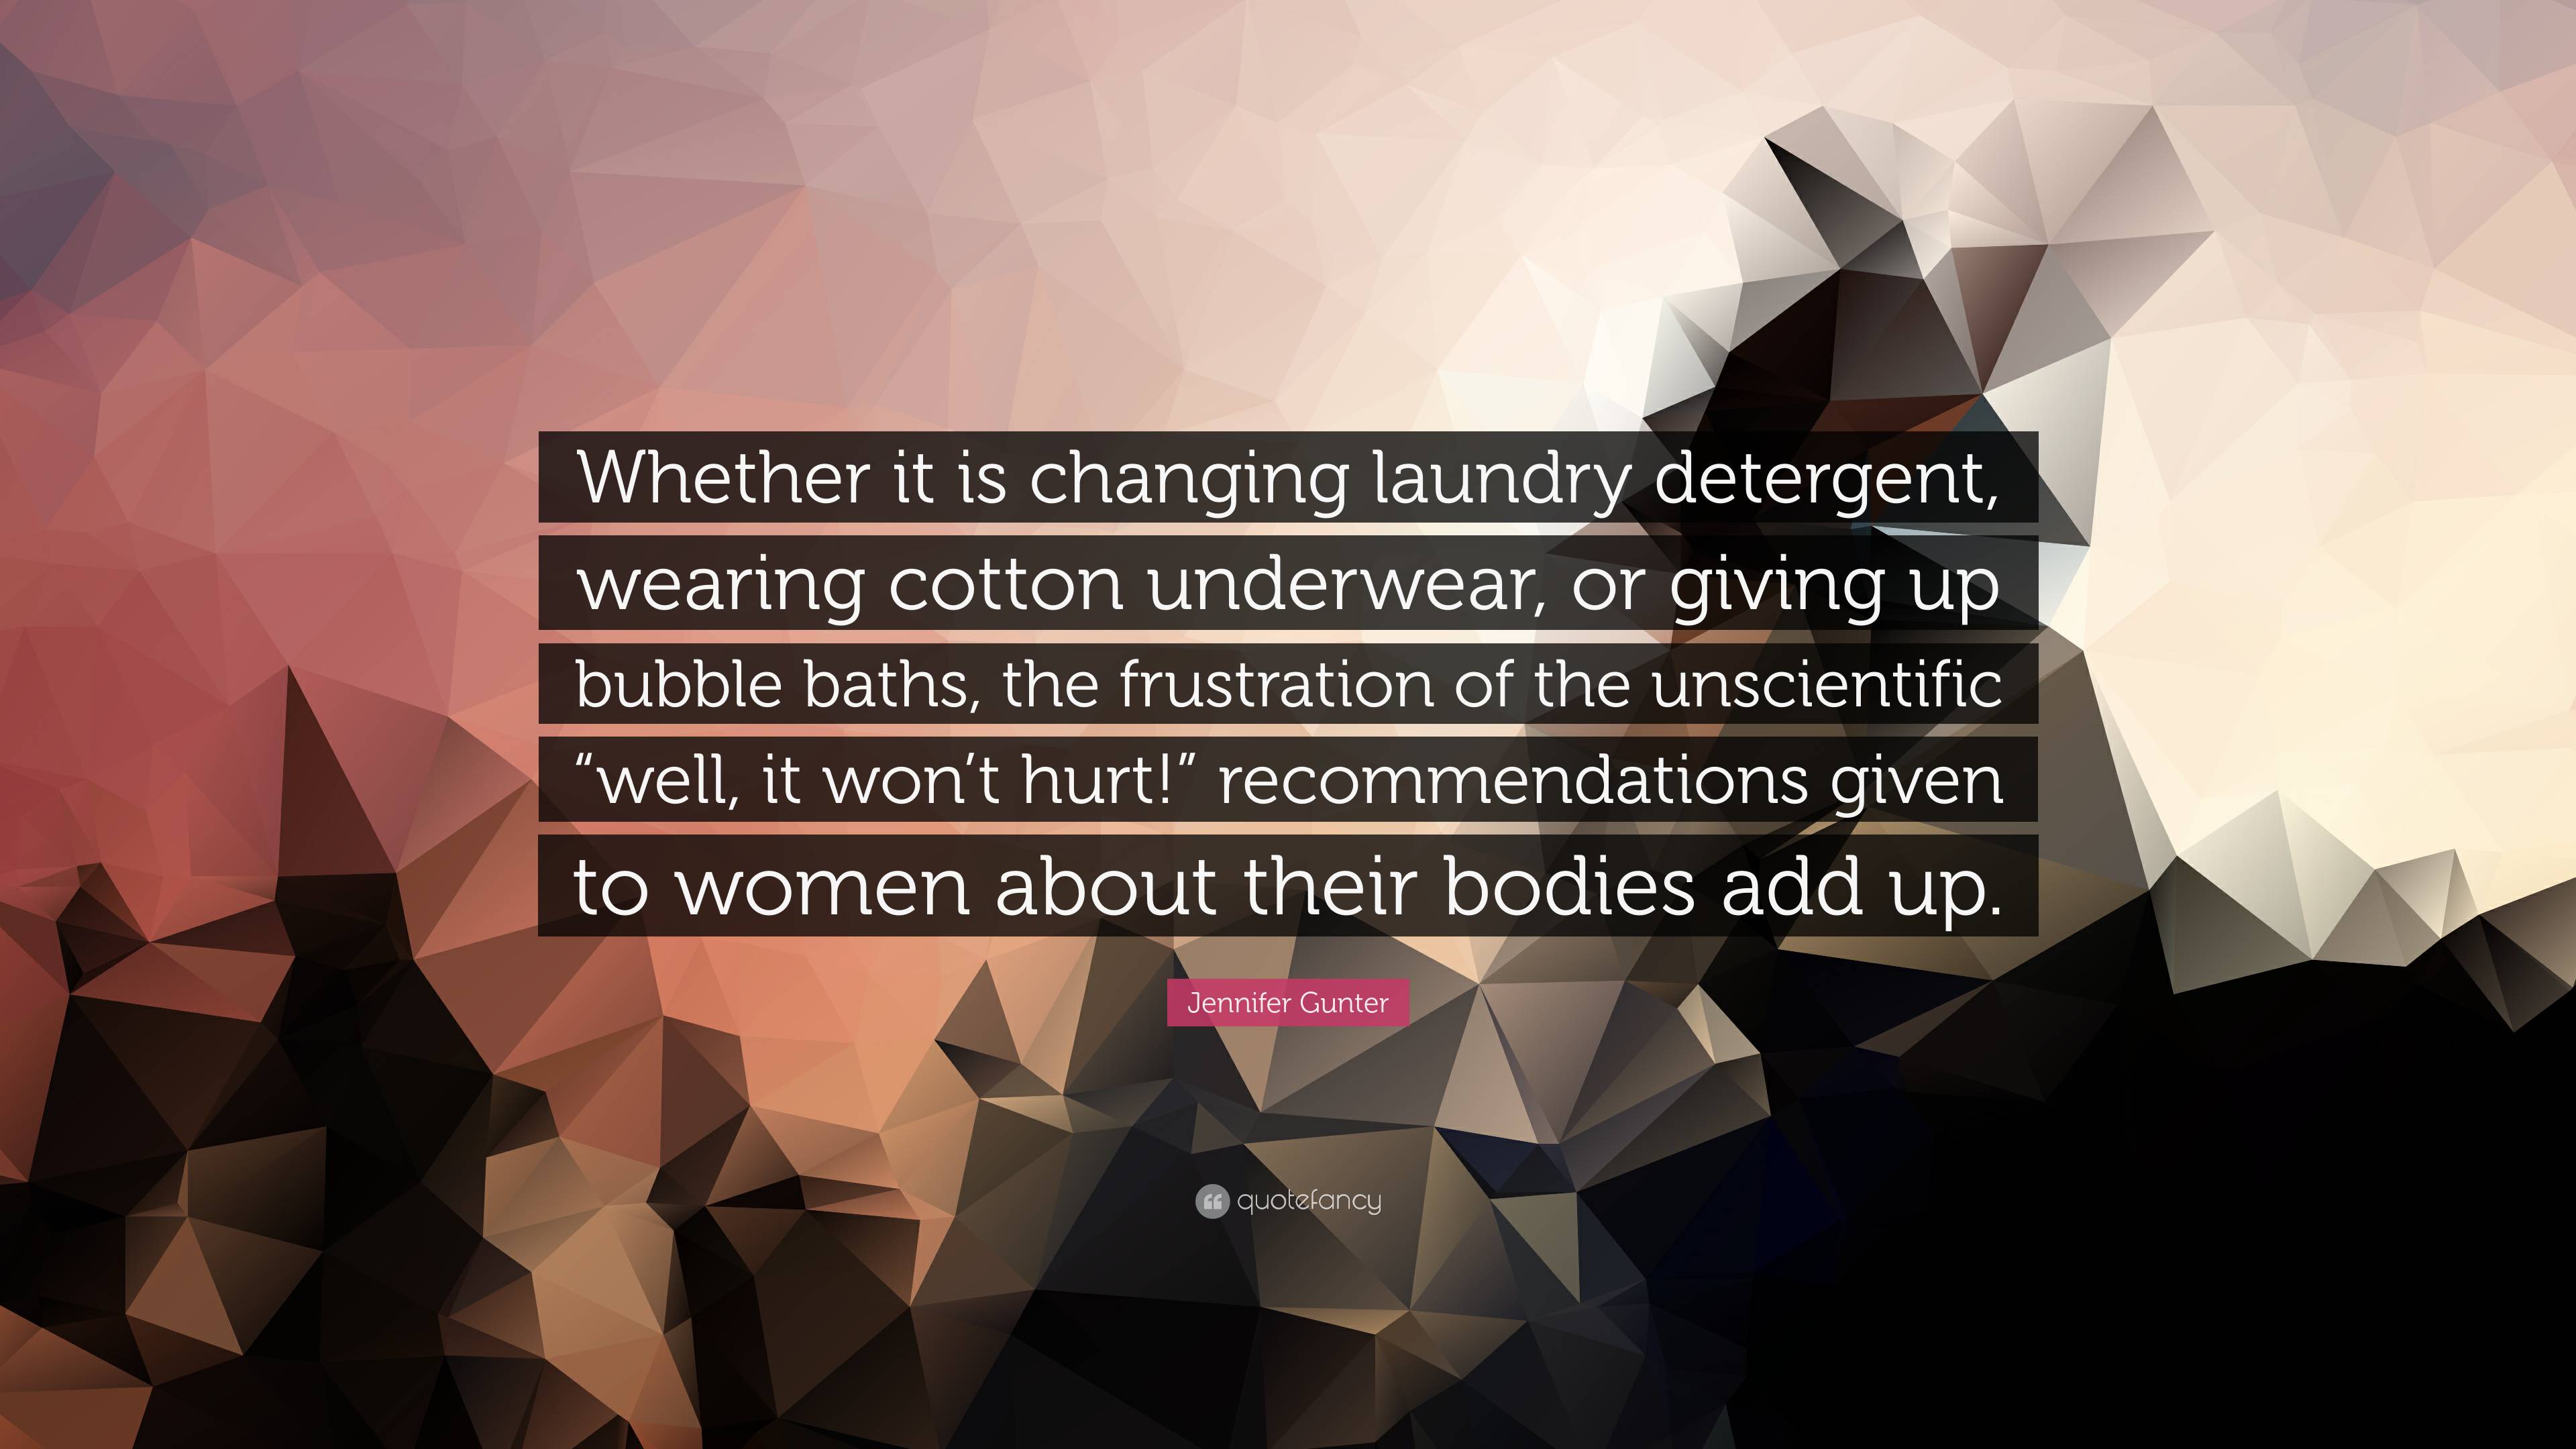 Jennifer Gunter Quote: “Whether it is changing laundry detergent, wearing  cotton underwear, or giving up bubble baths, the frustration of the un”